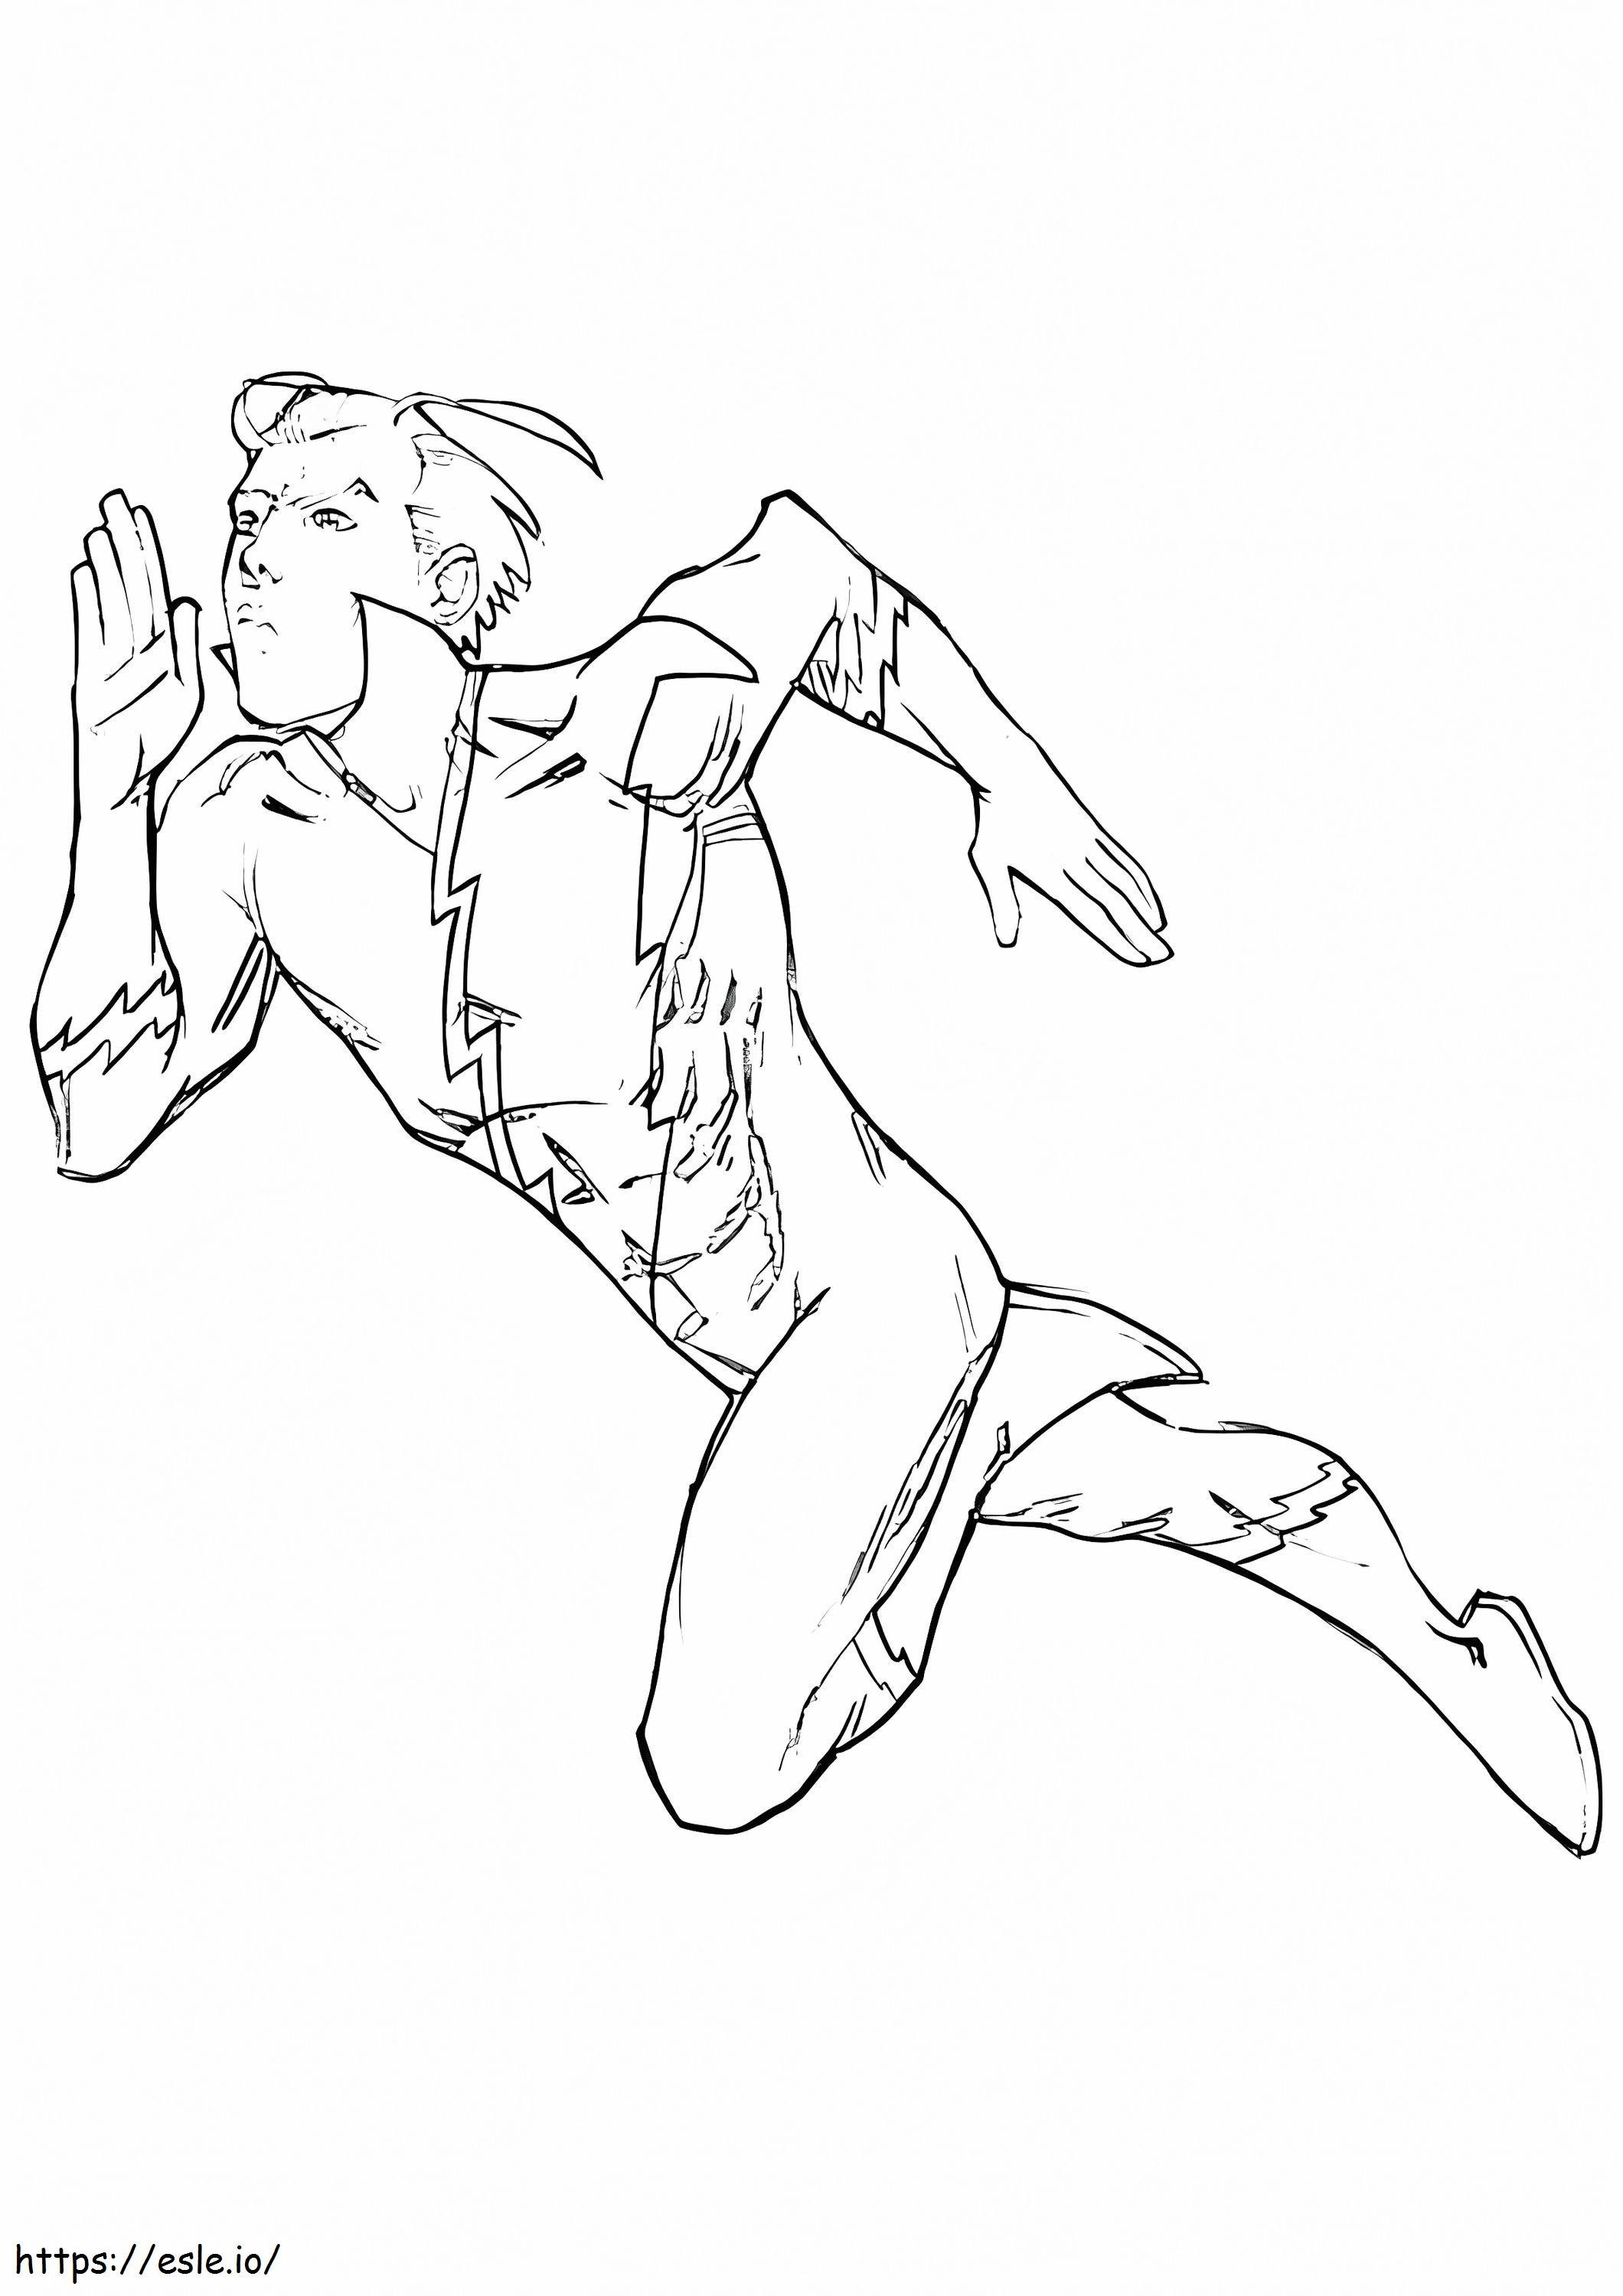 Quicksilver Is Running coloring page